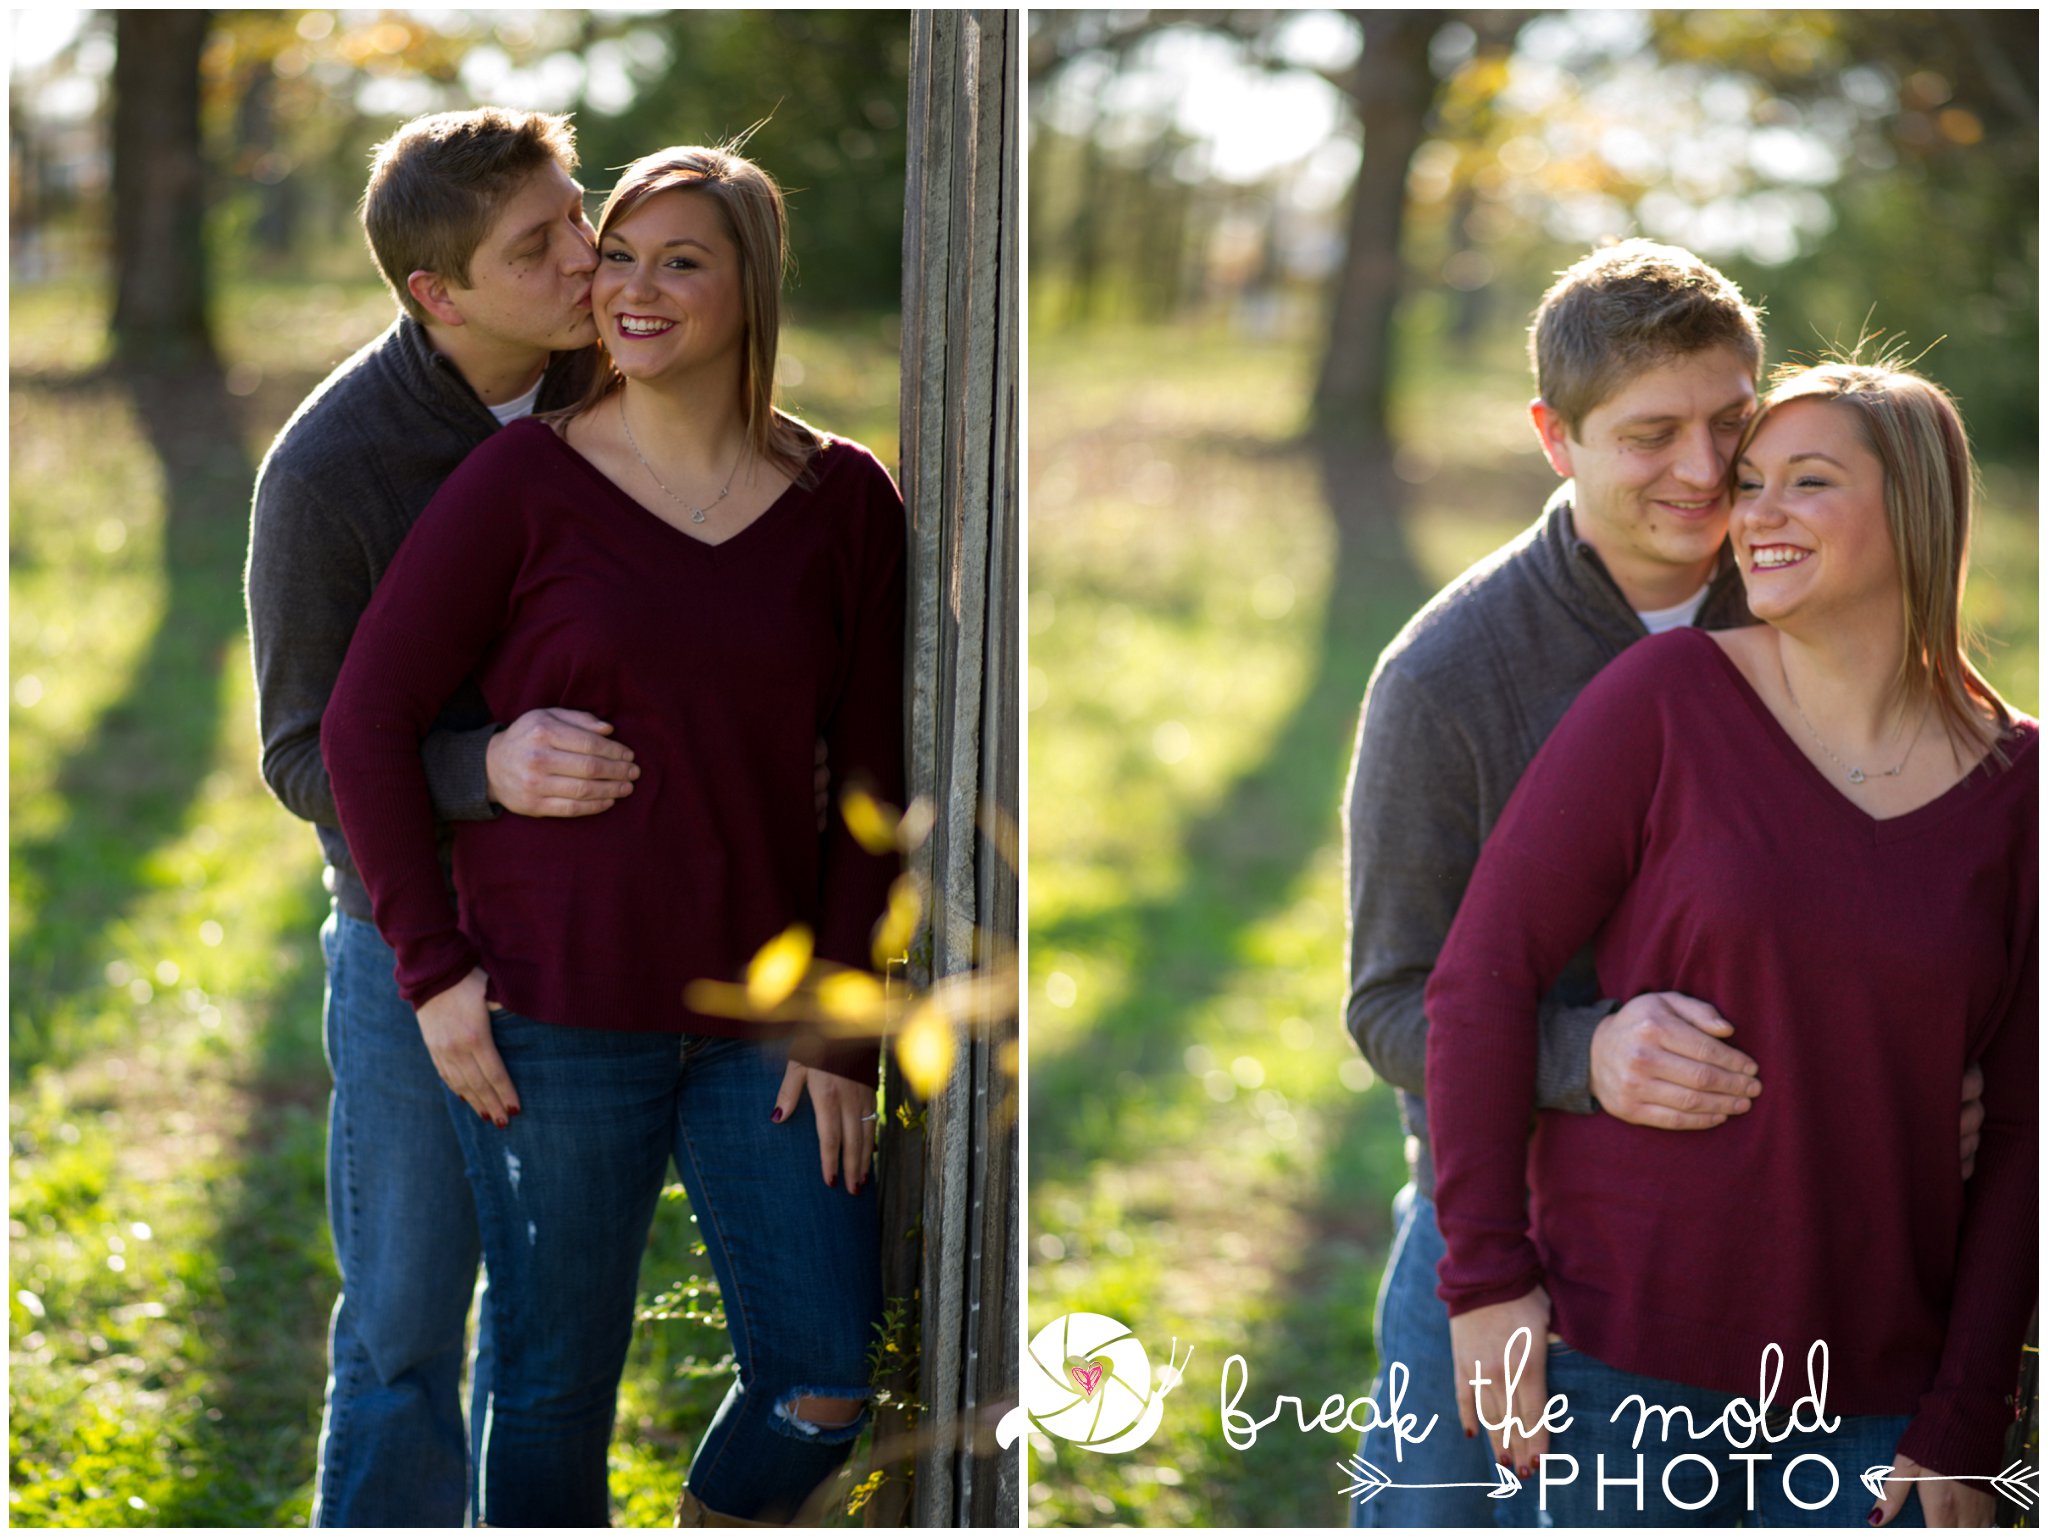 break-the-mold-photo-field-country-engagement-winter-shoot_6628.jpg